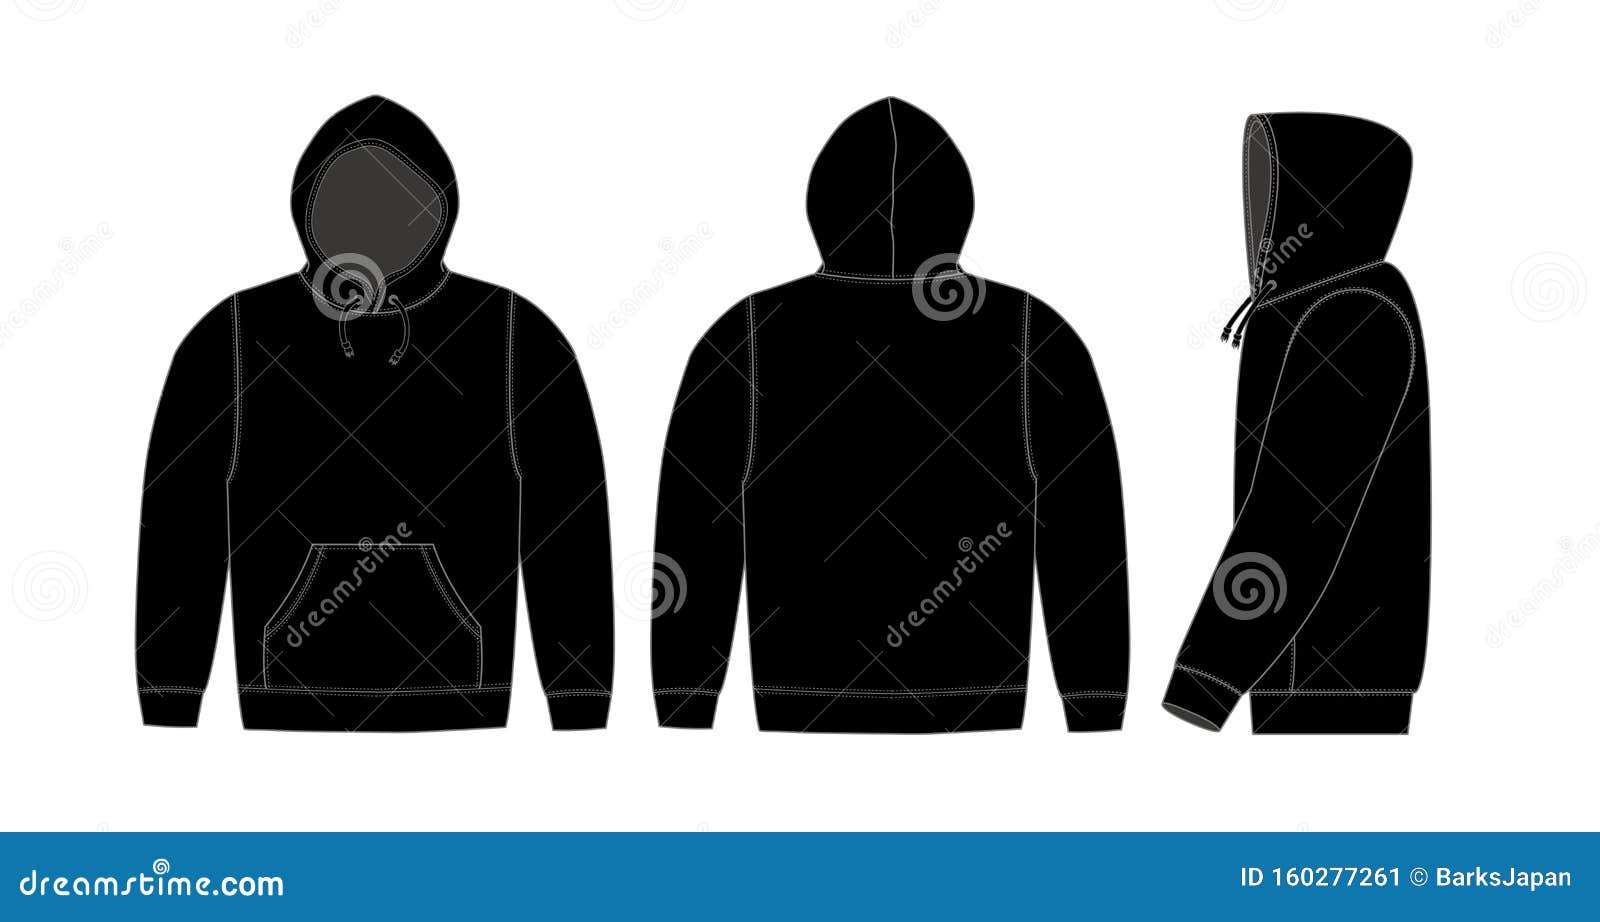 Download Illustration Of Hoodie Hooded Sweatshirt With Side View ...